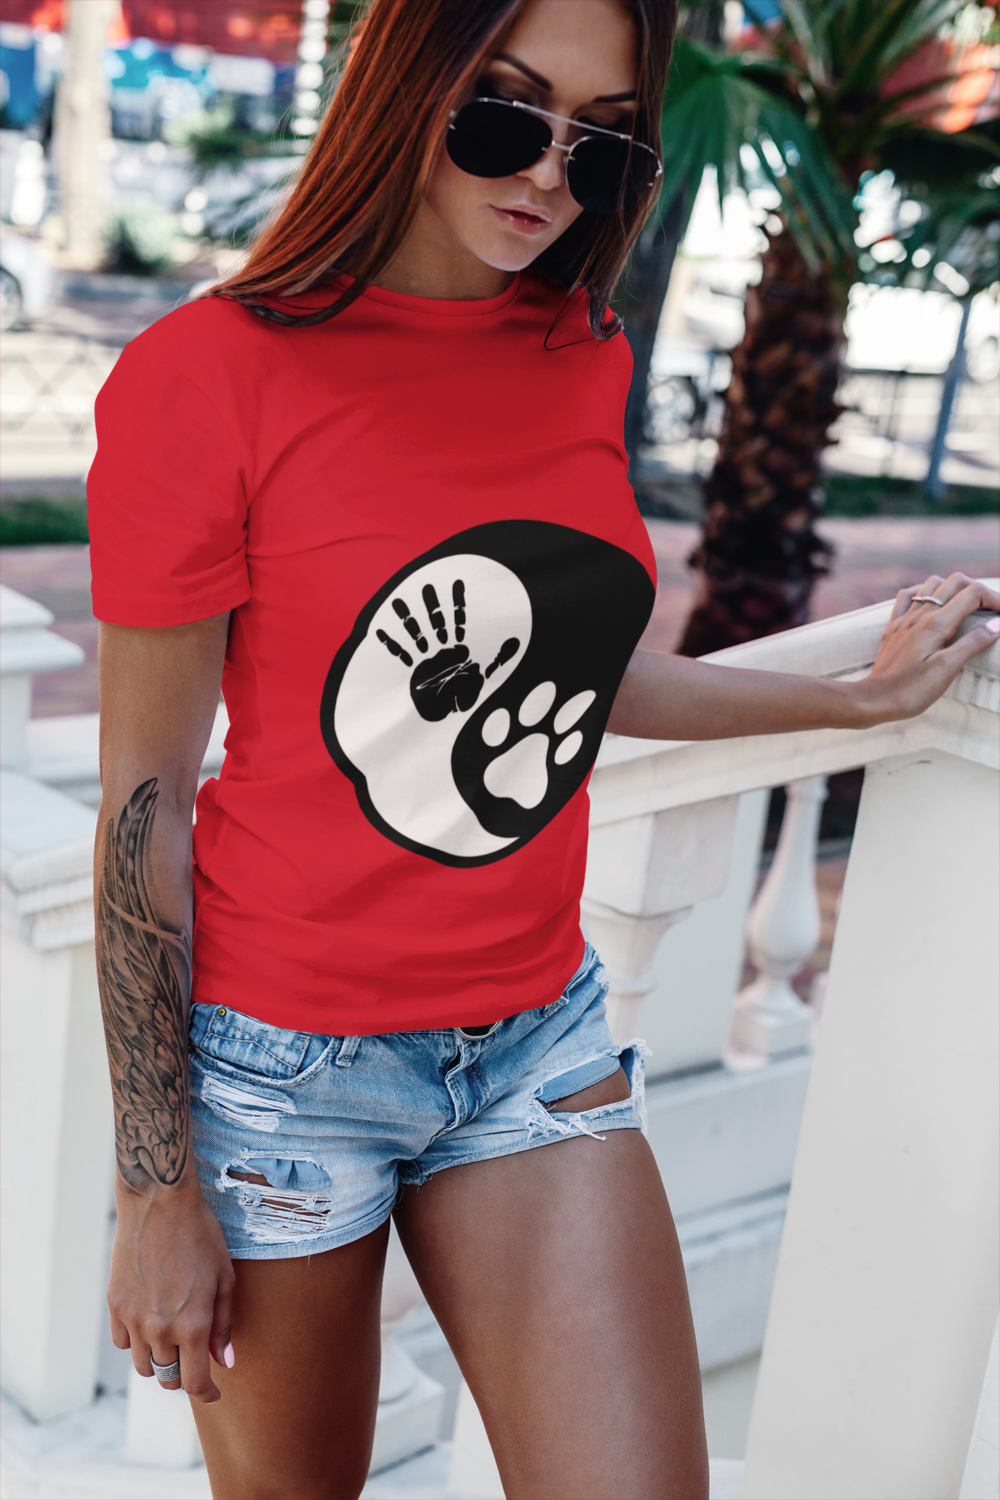 t shirt mockup featuring a tattooed woman with sunglasses 2258 el1 1